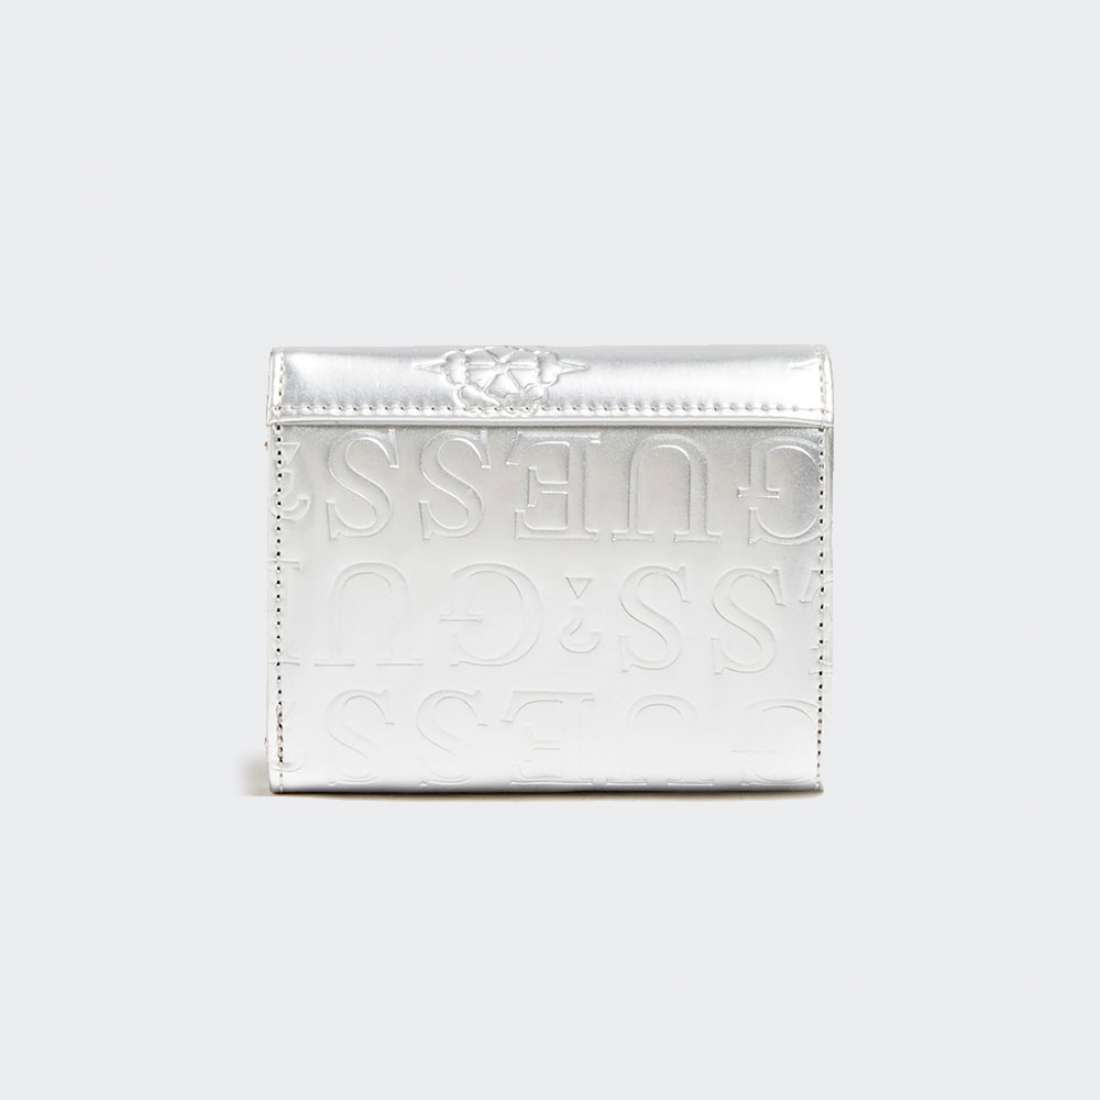 CARTEIRA GUESS KAYLYN SLG SMALL TRIFOLD SILVER